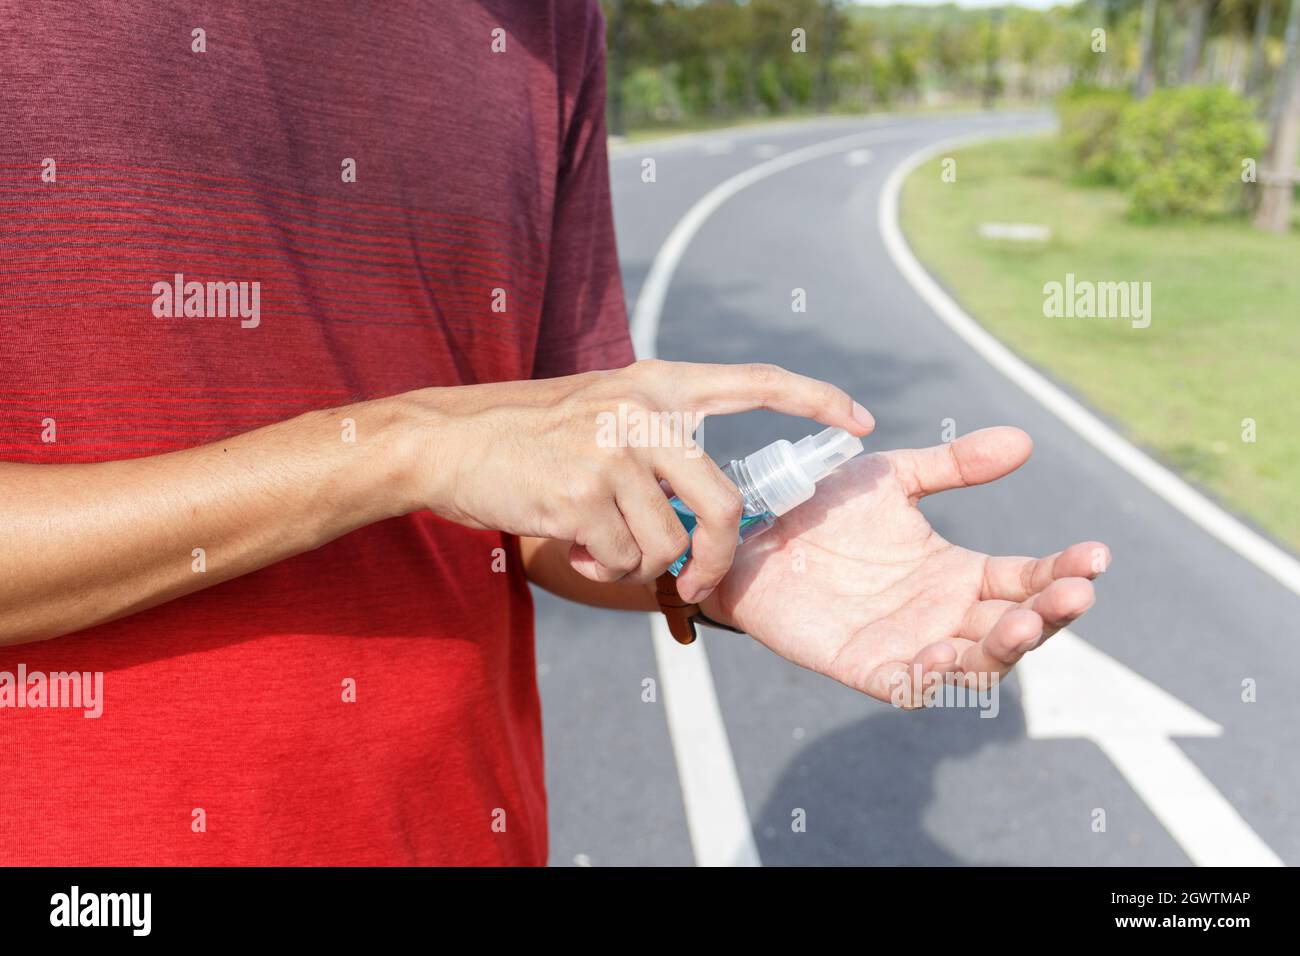 The Man Use Alcohol To Clean Hands For Prevention Of Coronavirus Virus Outbreak. Coivd 19 Stock Photo